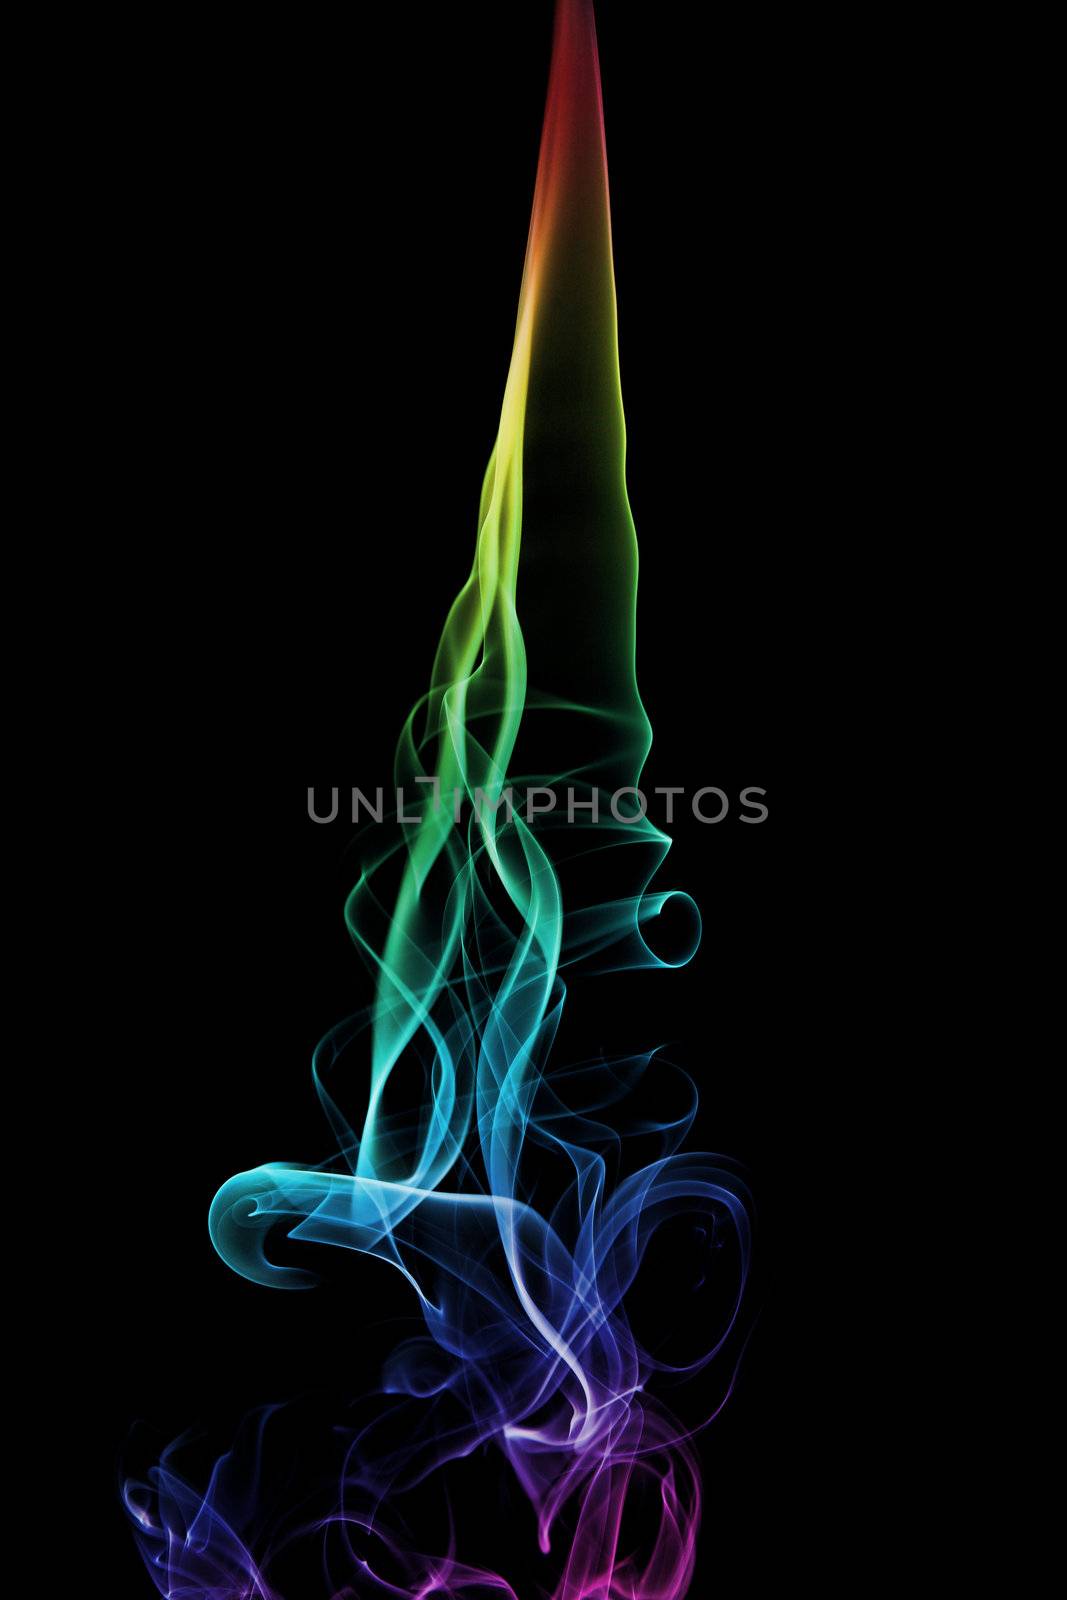 A rainbow colored smoke trail from an incense stick. Black background.